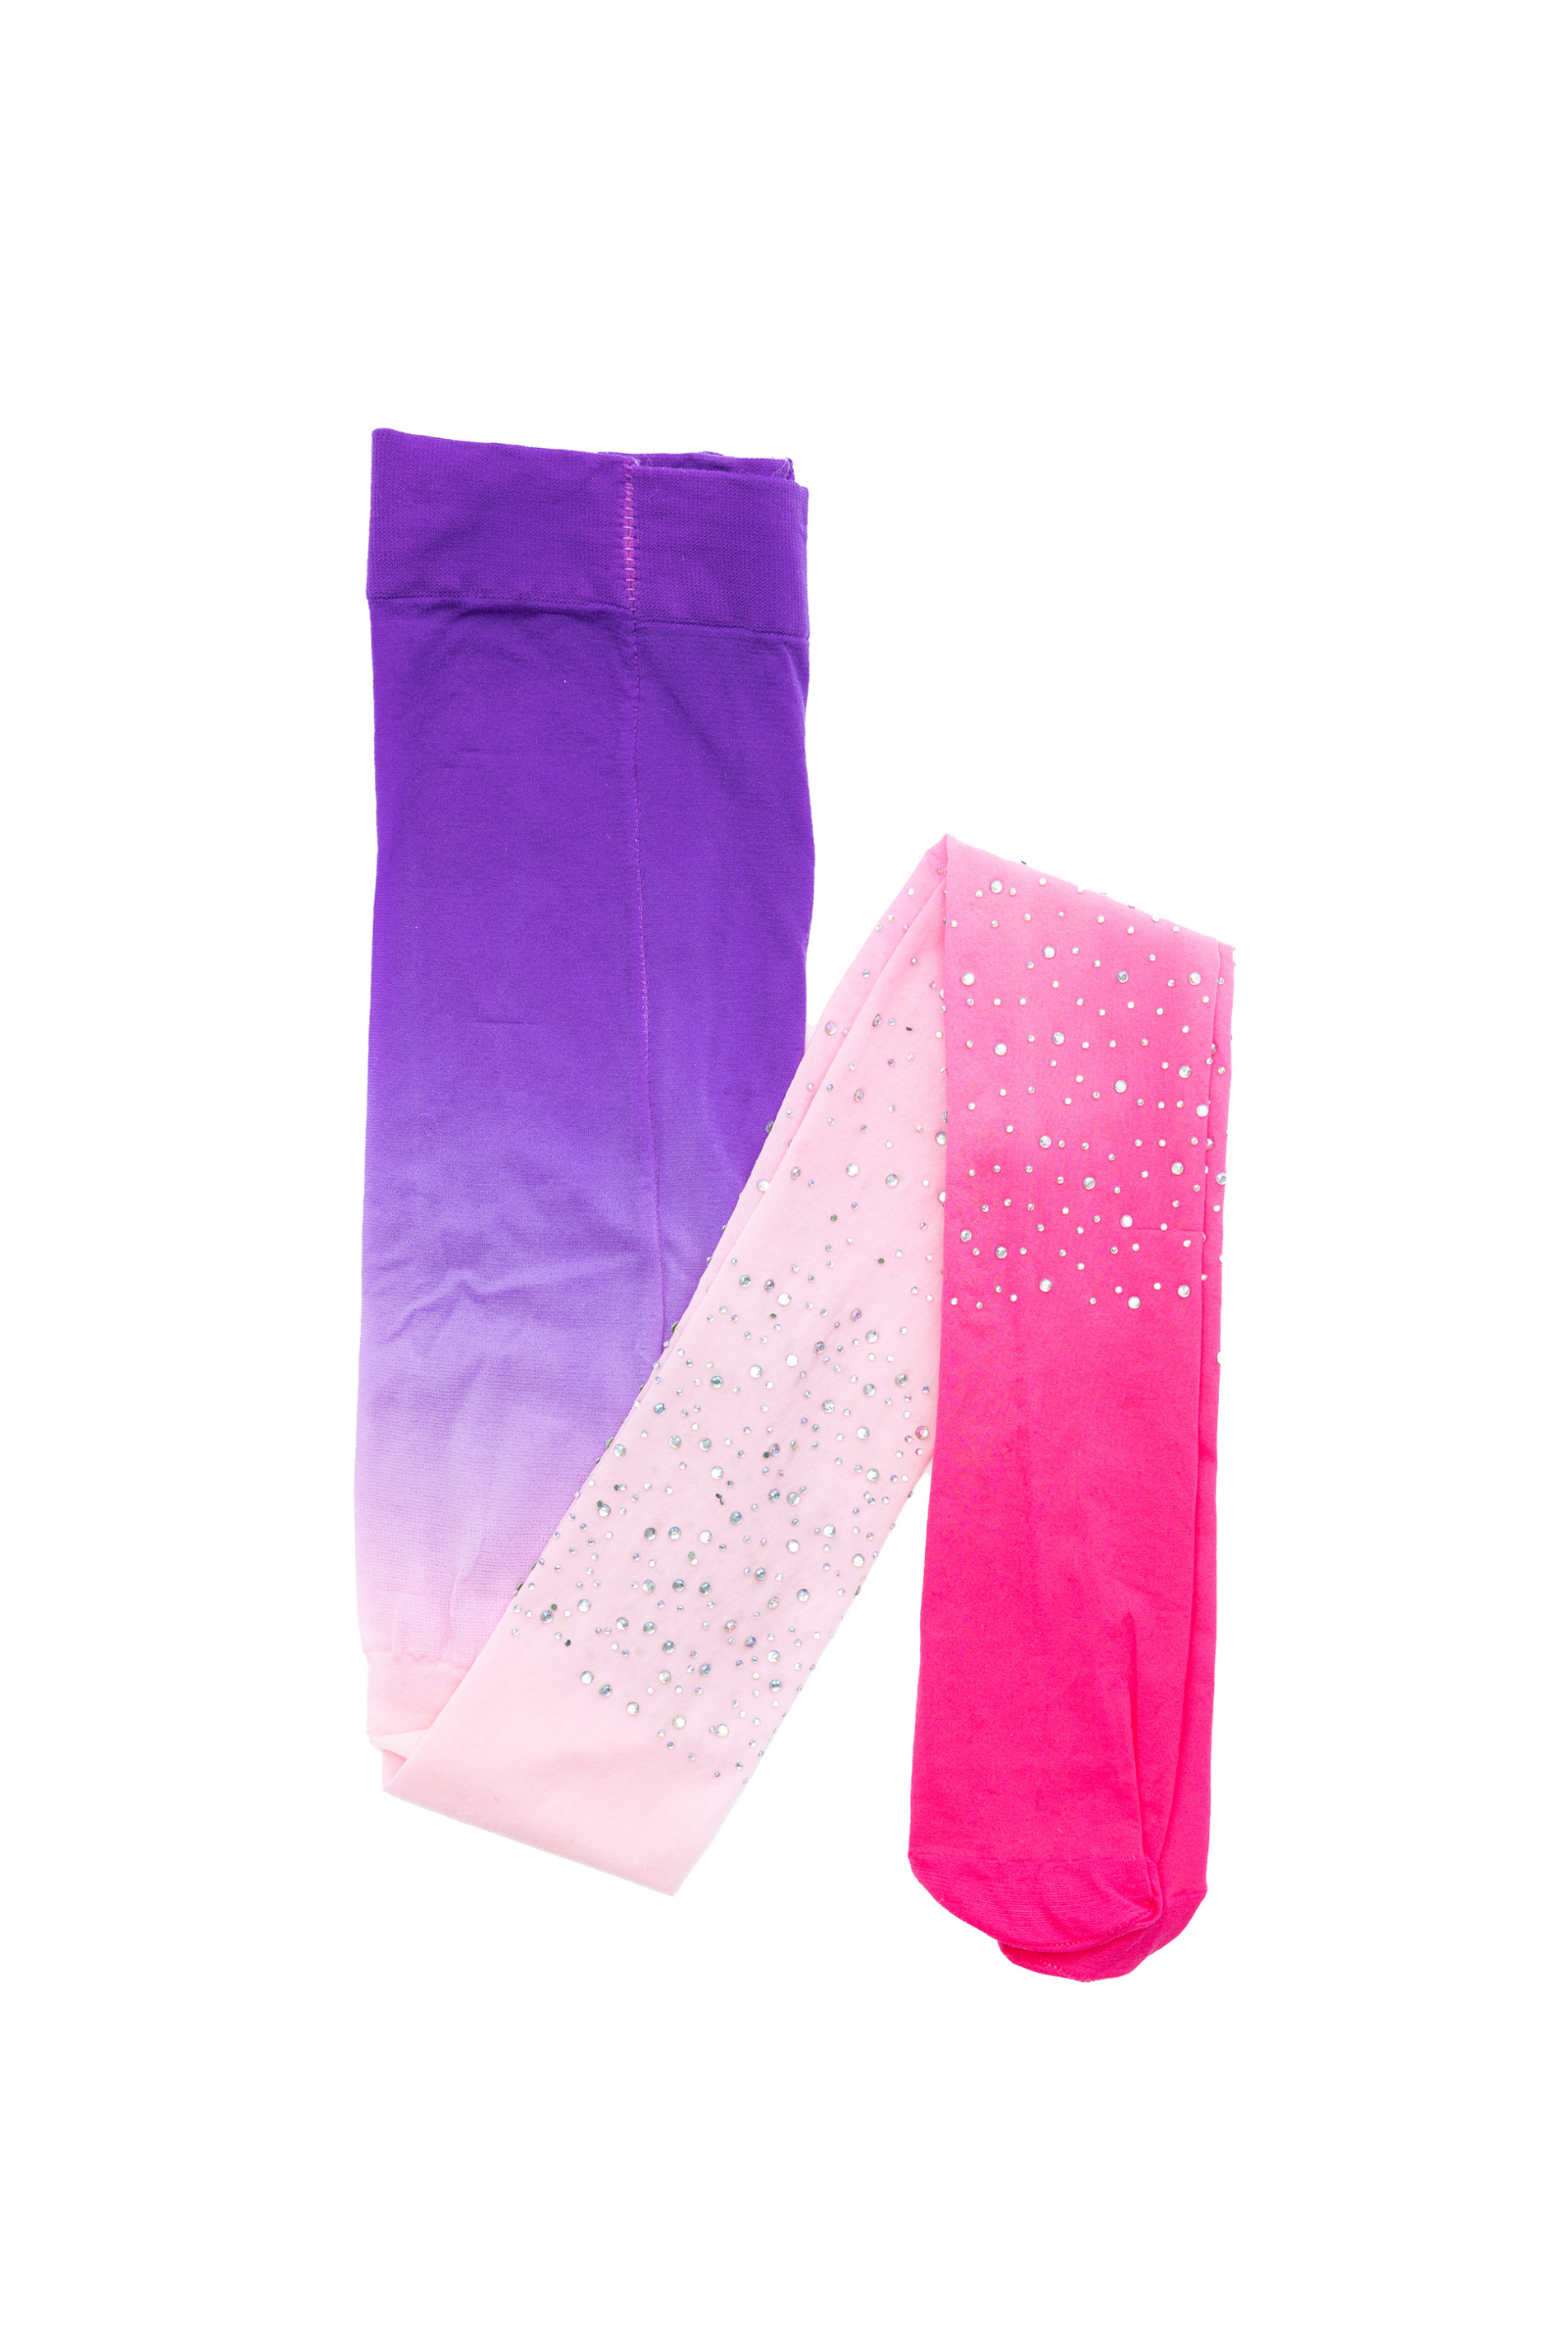 Hot Pink Bling Tights – Foxtail Lilies